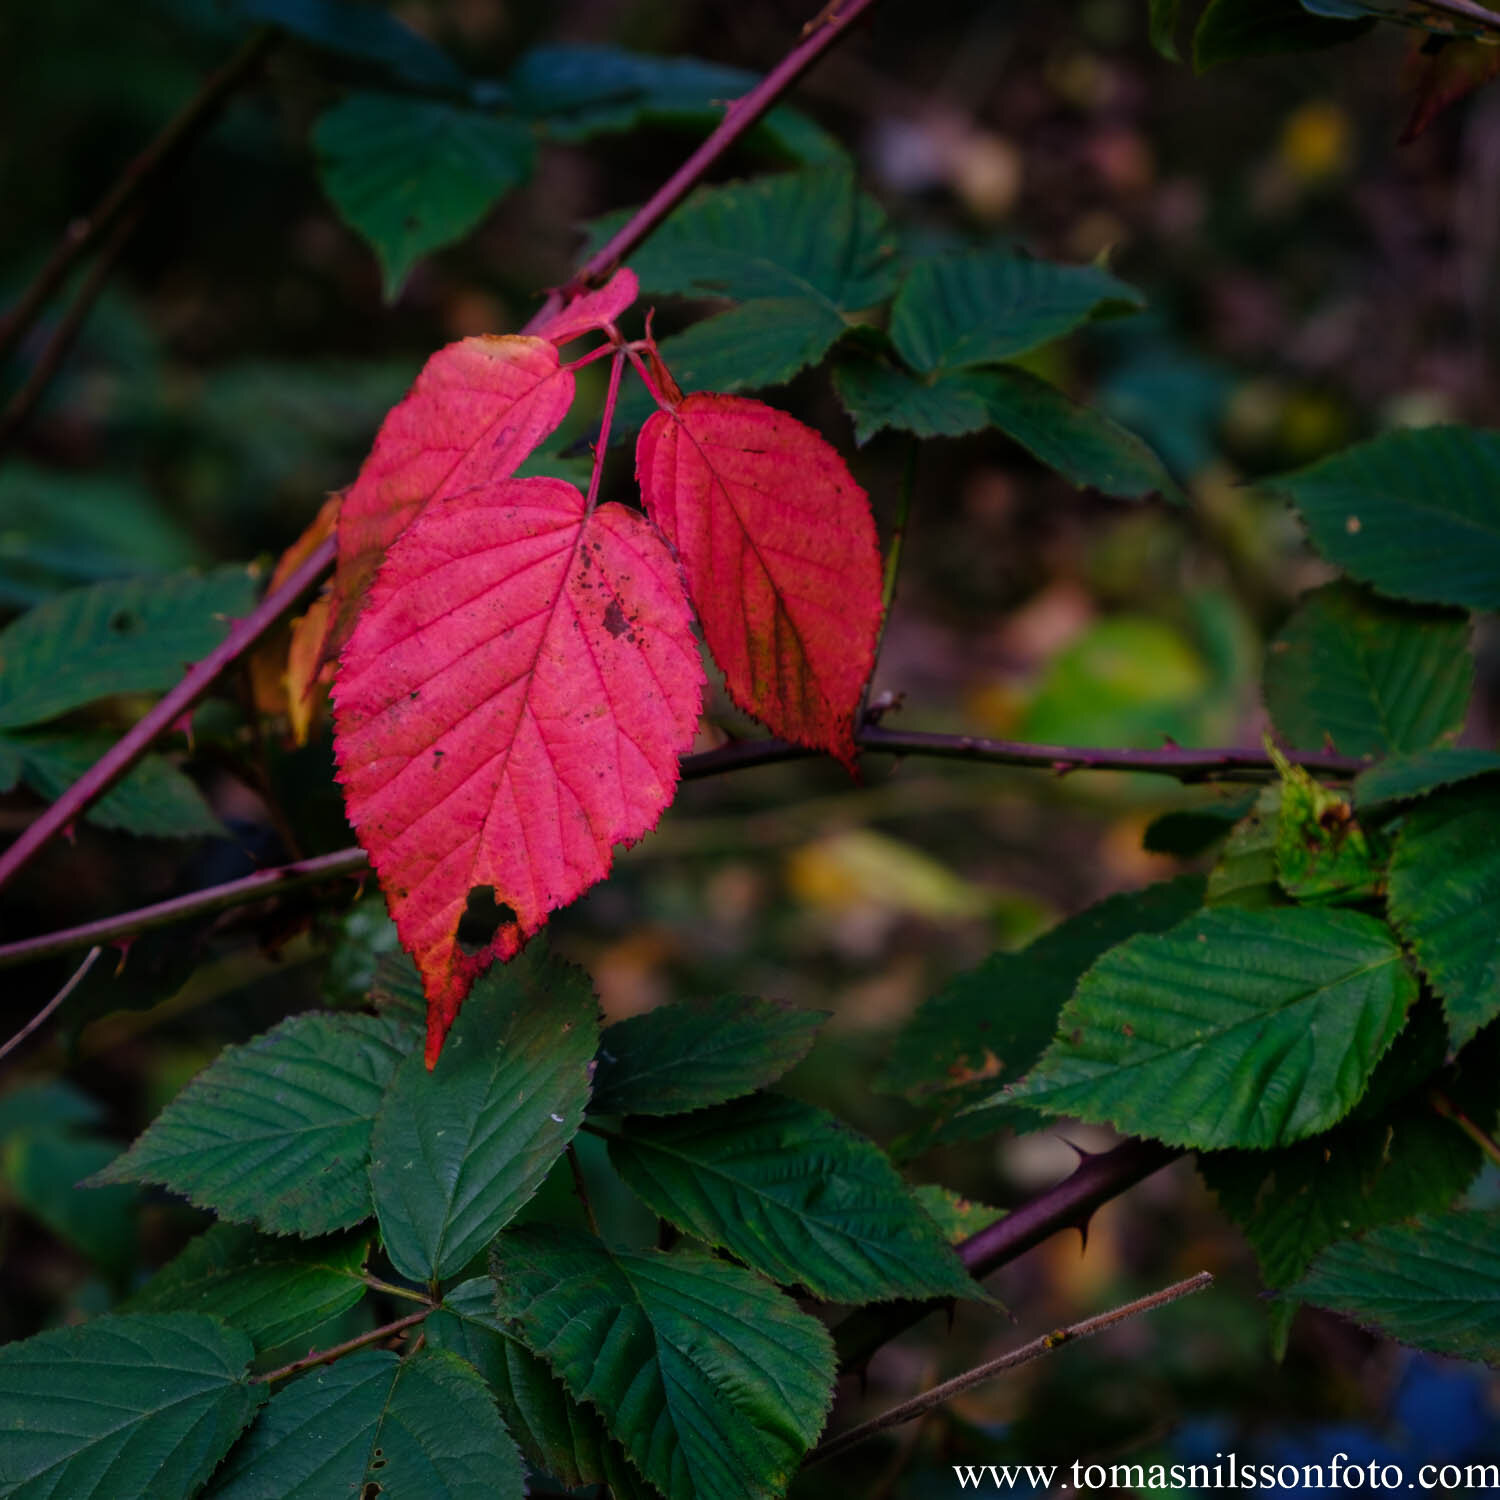 Day 295 - October 21: Red & Green